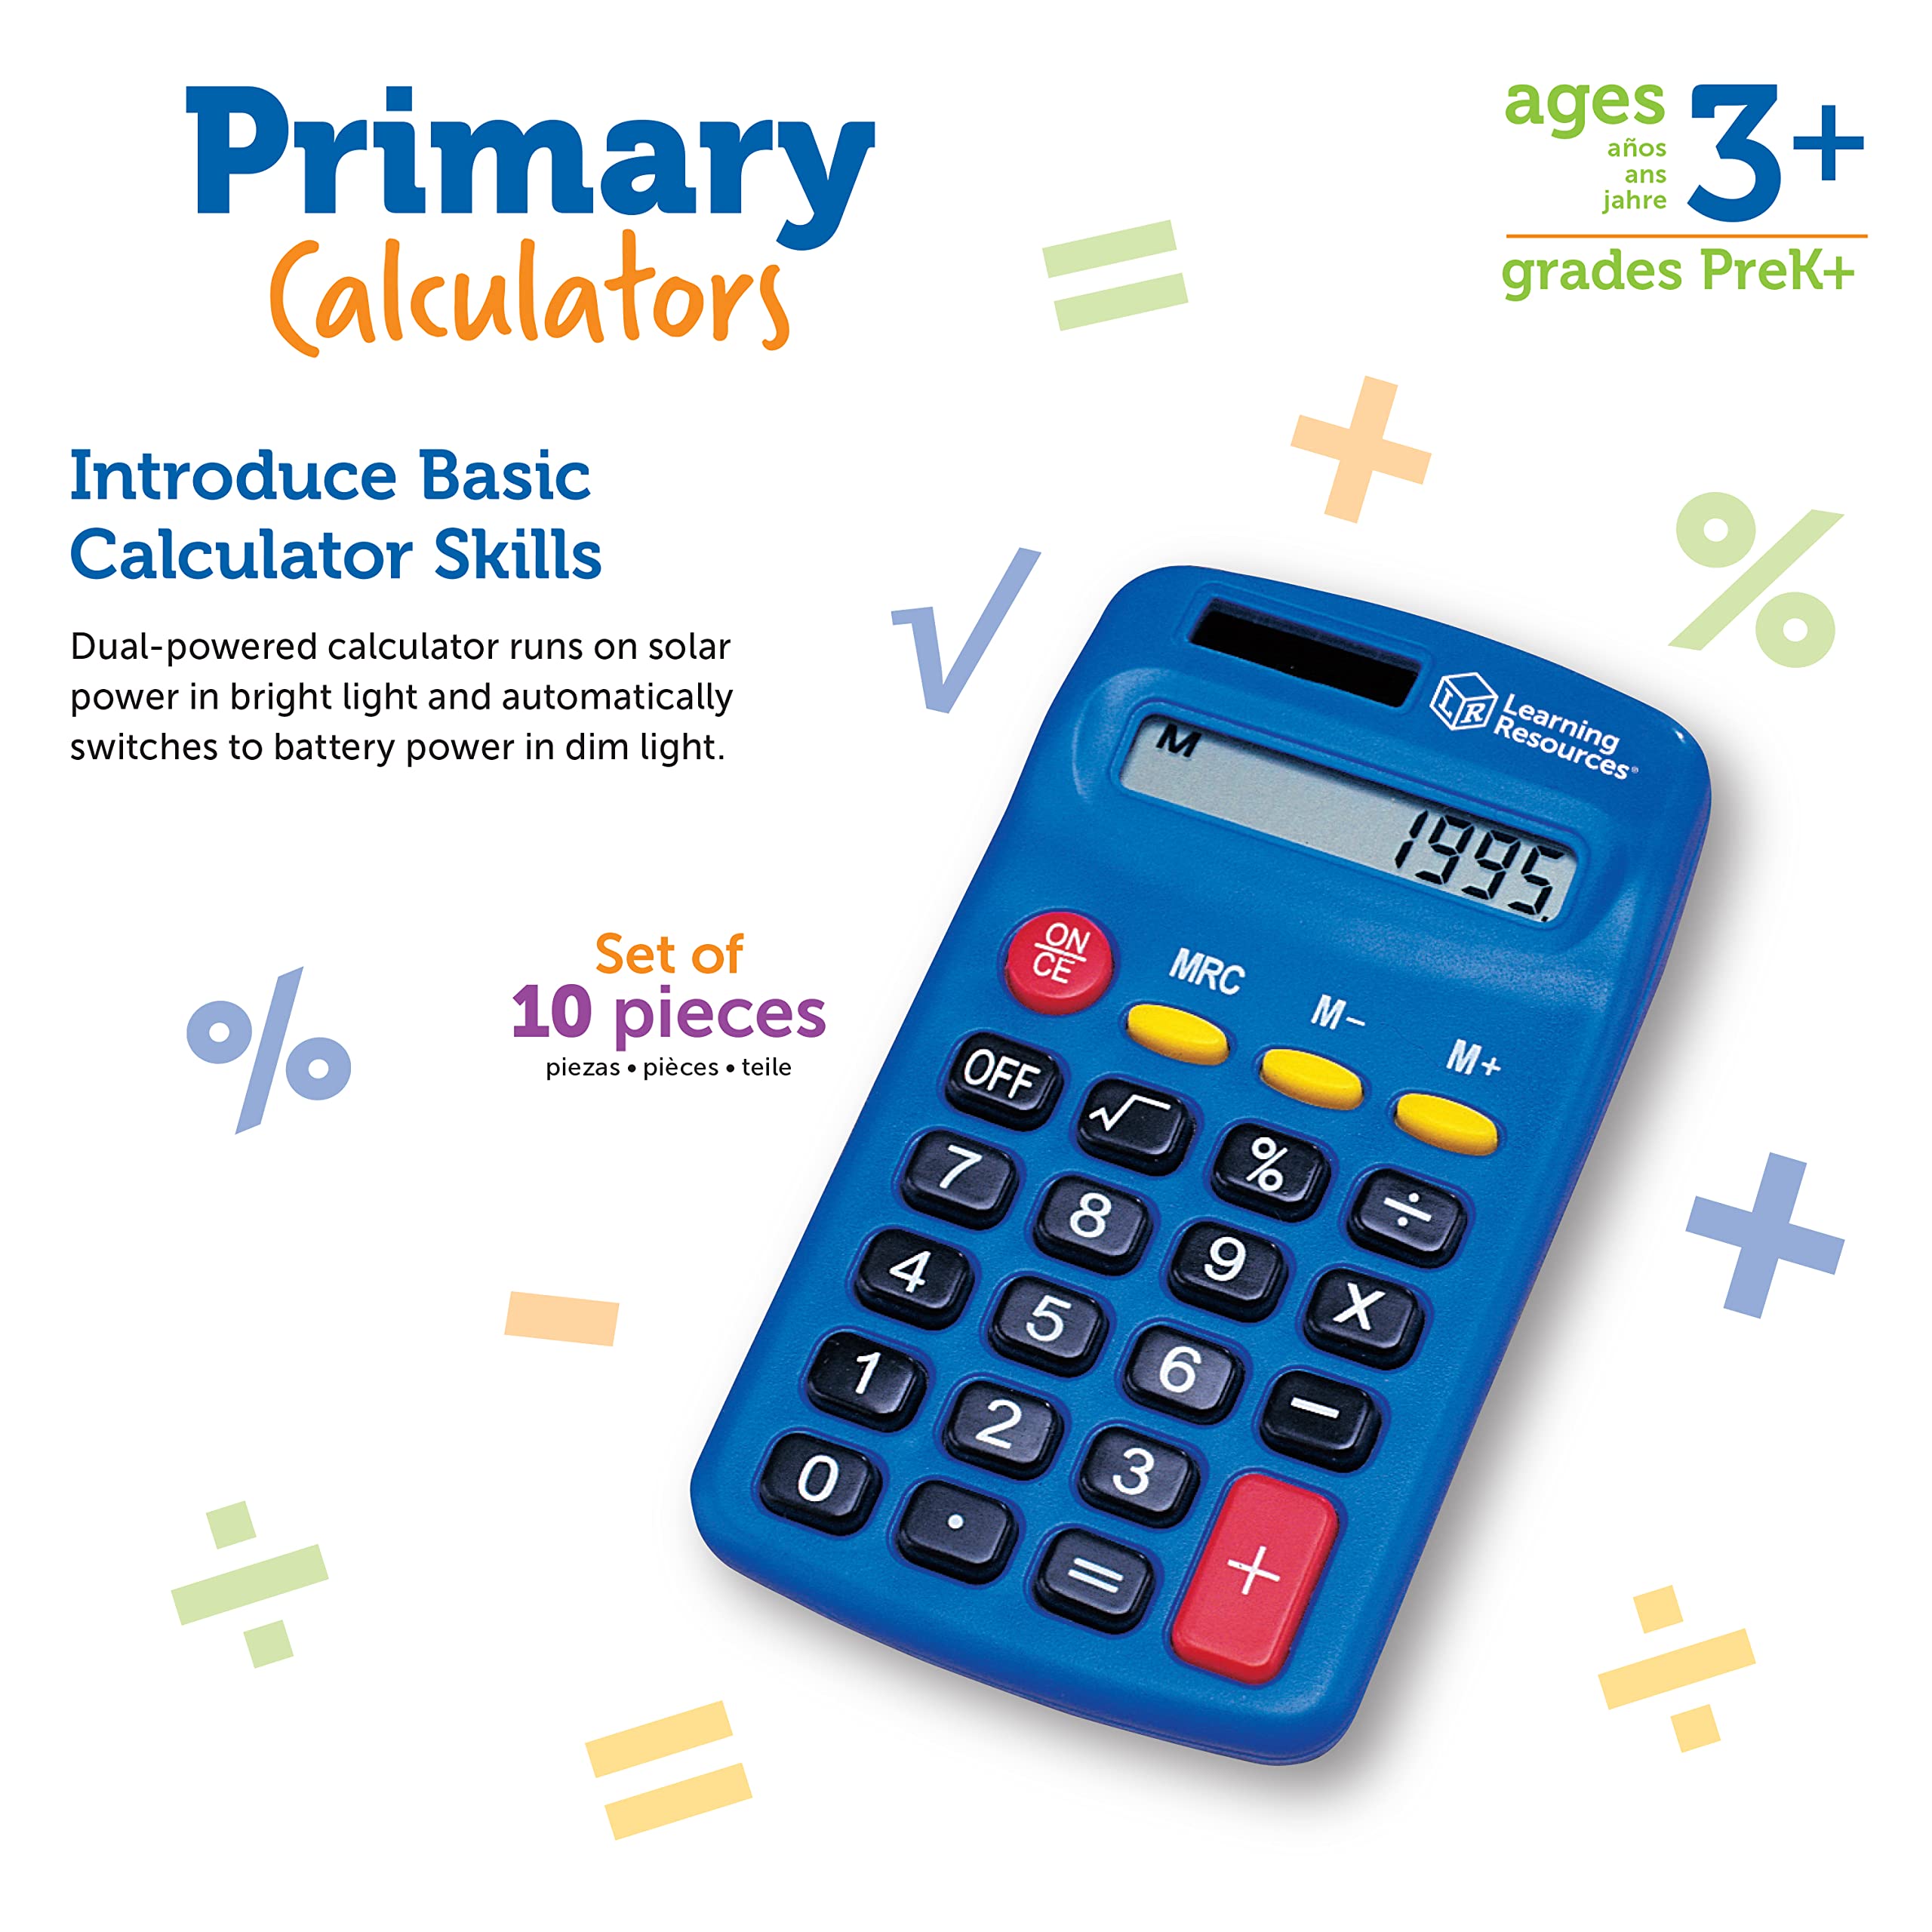 Learning Resources Primary Calculator - 10 Pieces, Ages 3+, Basic Solar Powered Calculators, Teacher Supplies, Back to School Supplies